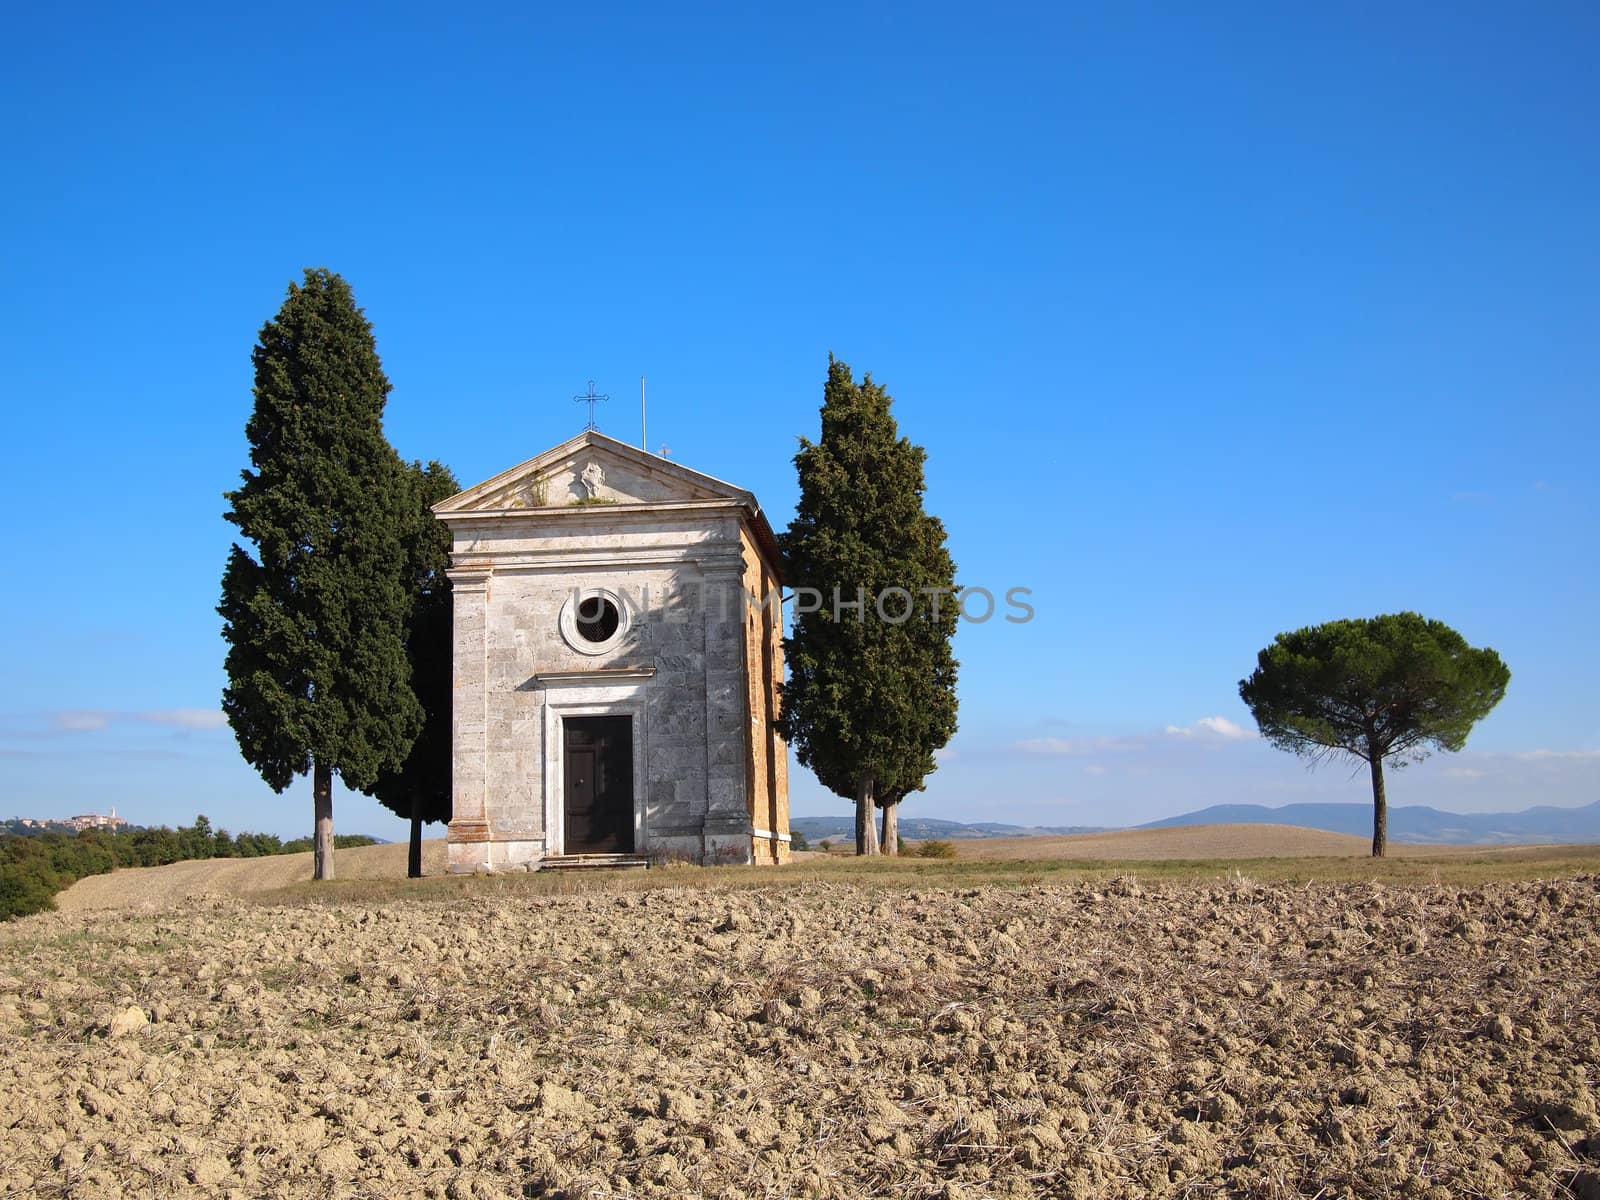 Cappella di Vitaleta with cypress trees between San Quirico d�Orcia and Pienza in the Val d�Orcia in Tuscany, Italy.